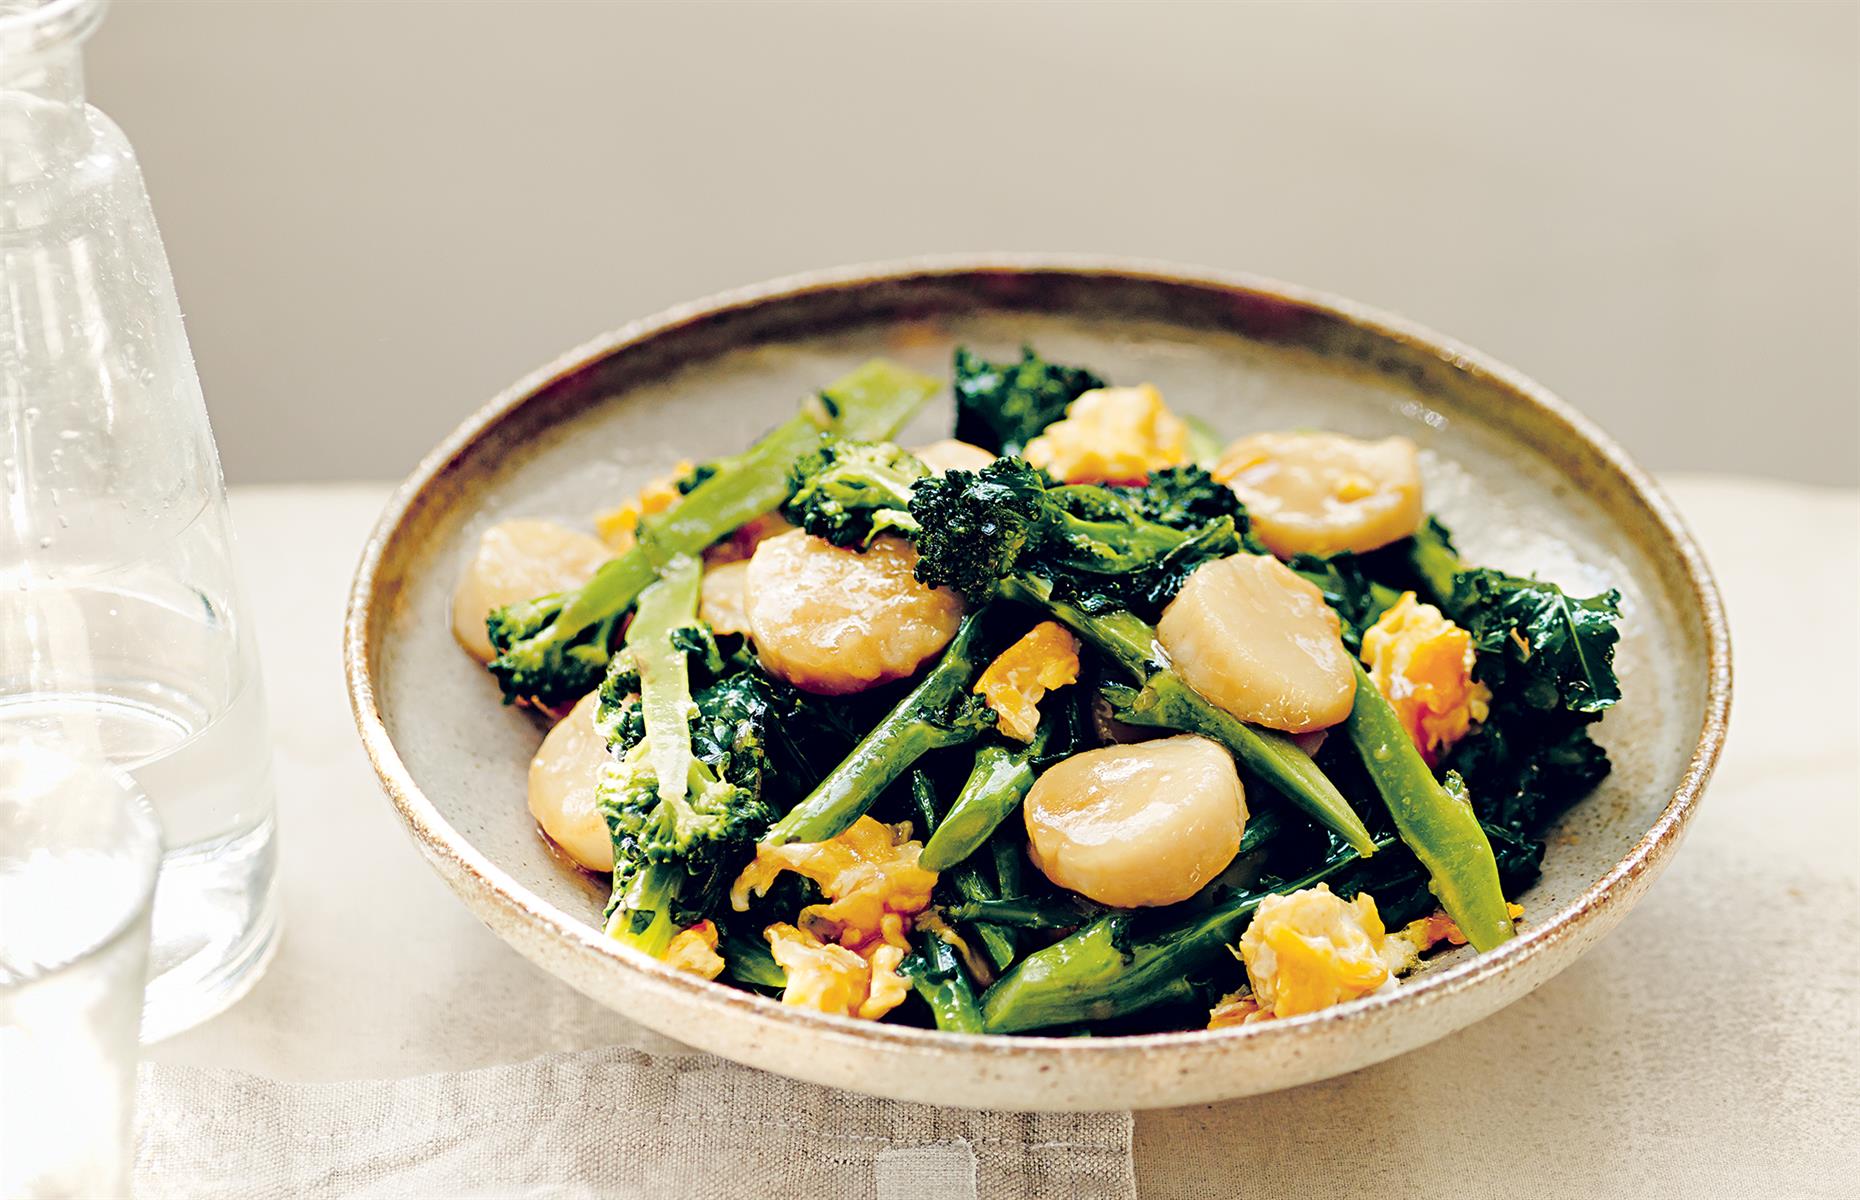 Under 30 minutes: pan-fried scallops with broccoli